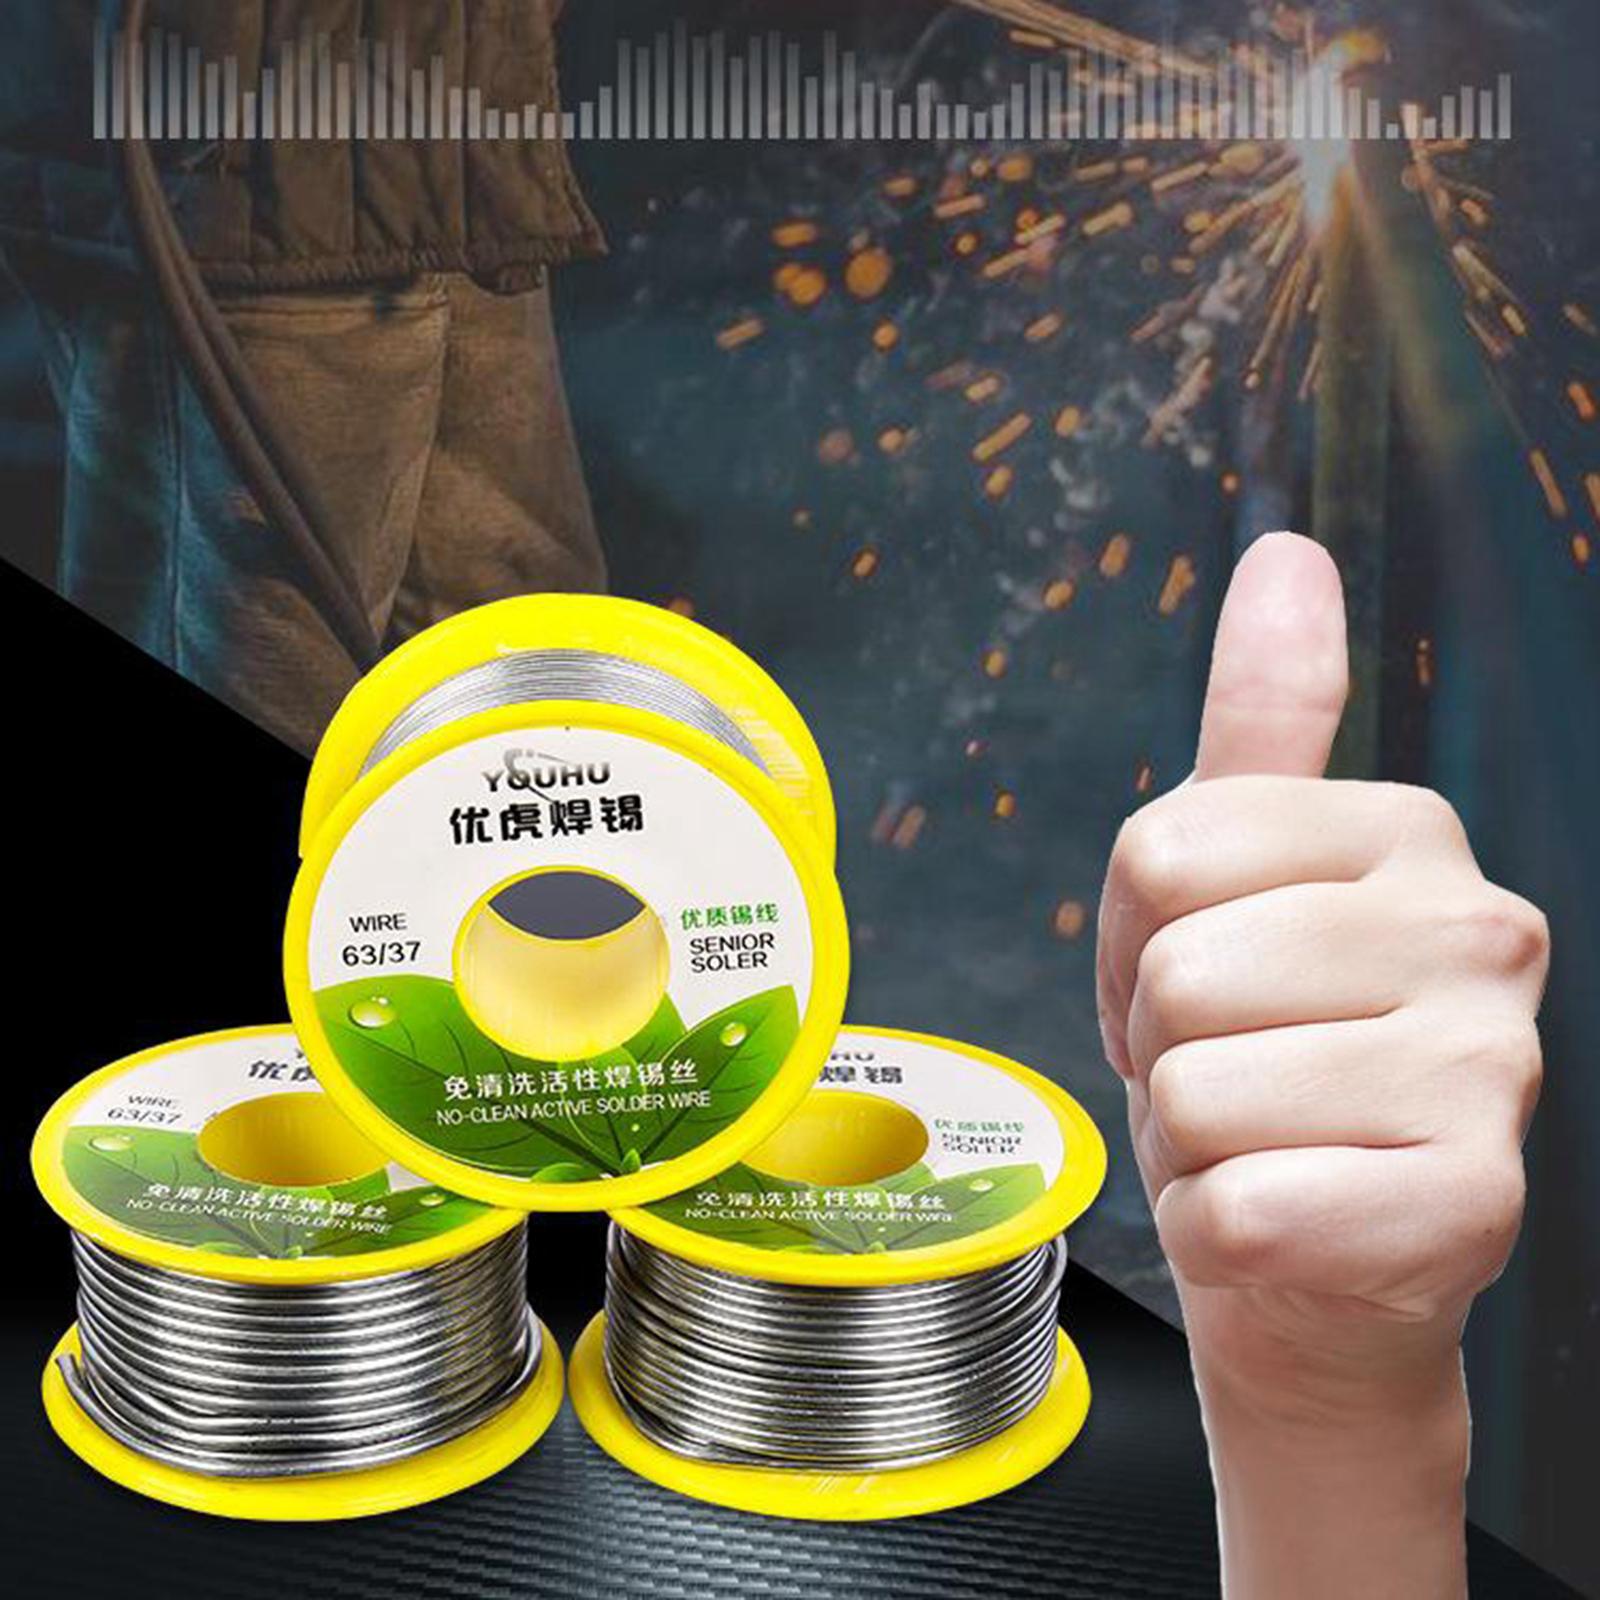 0.8mm 63/37 Tin Lead Rosin Core Solder Welding Wire for Electrical Soldering